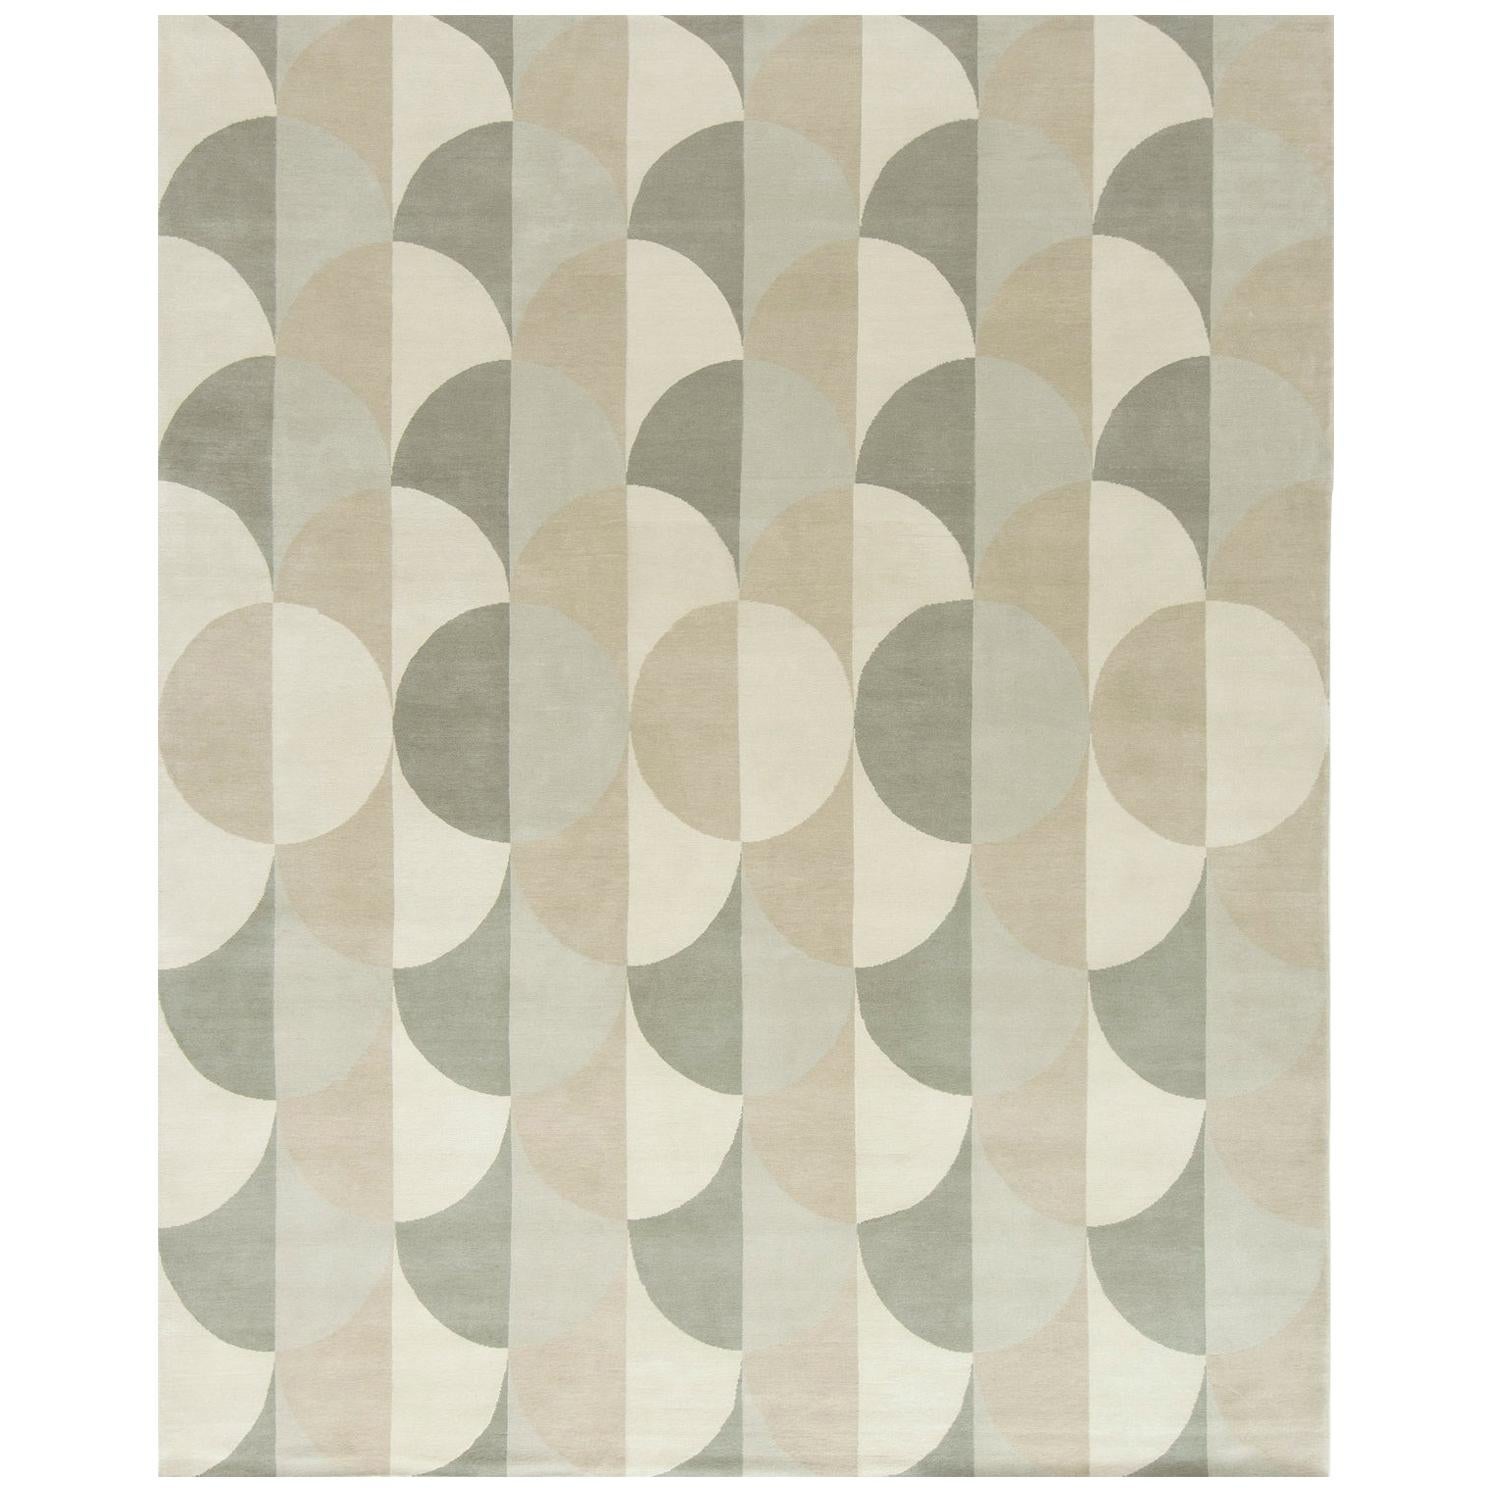 Orseola Rug by FORM Design Studio, Baci Collection from Mehraban